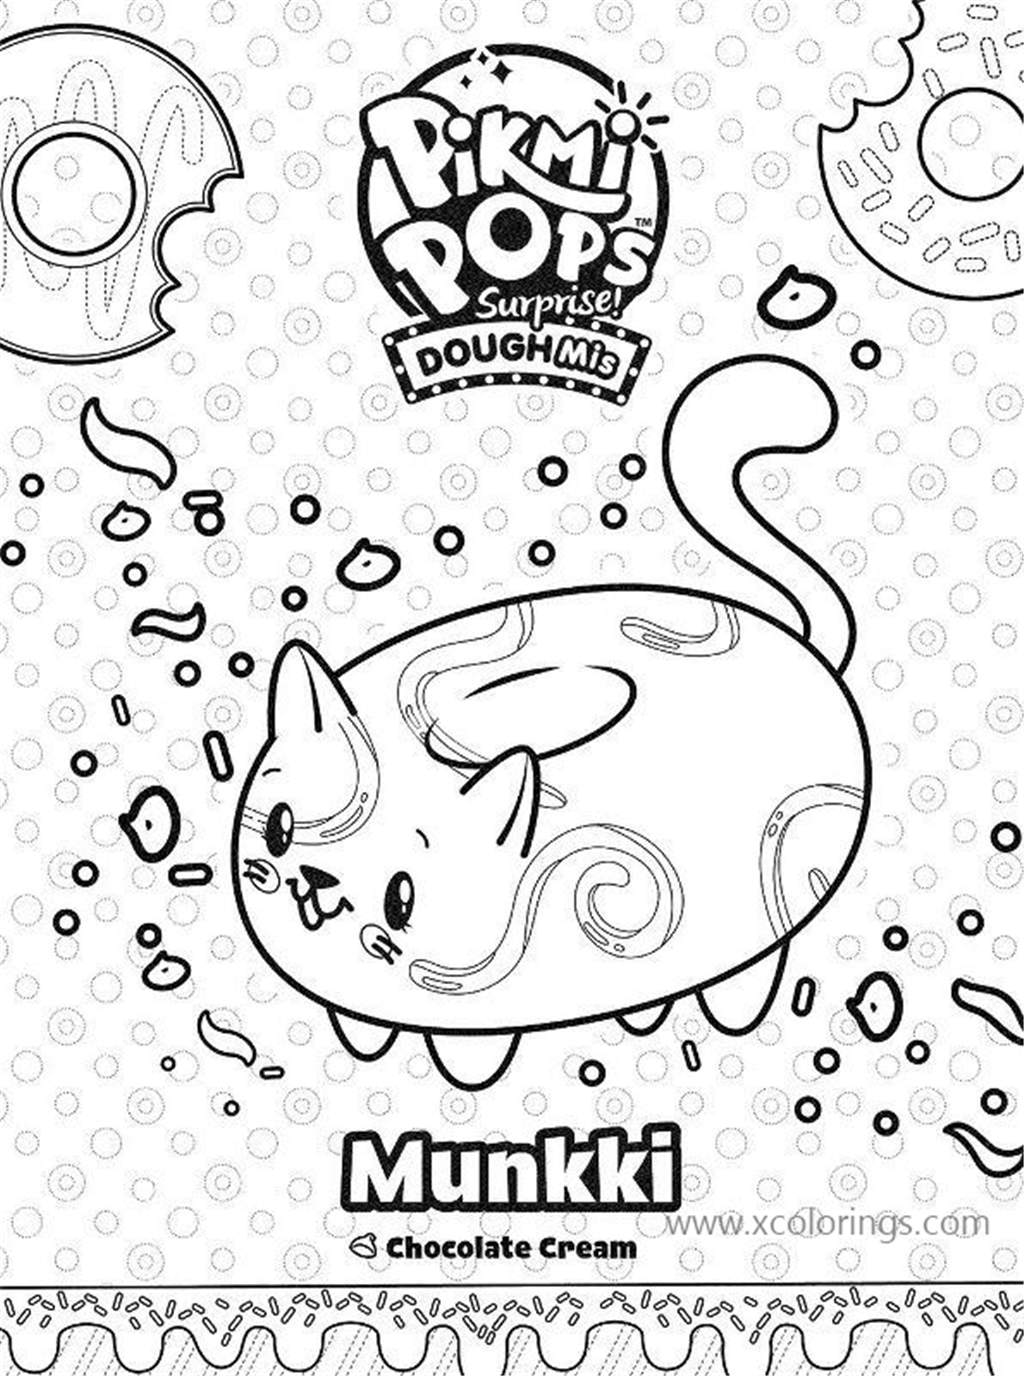 Free Munkki Donut from Pikmi Pops Coloring Pages printable